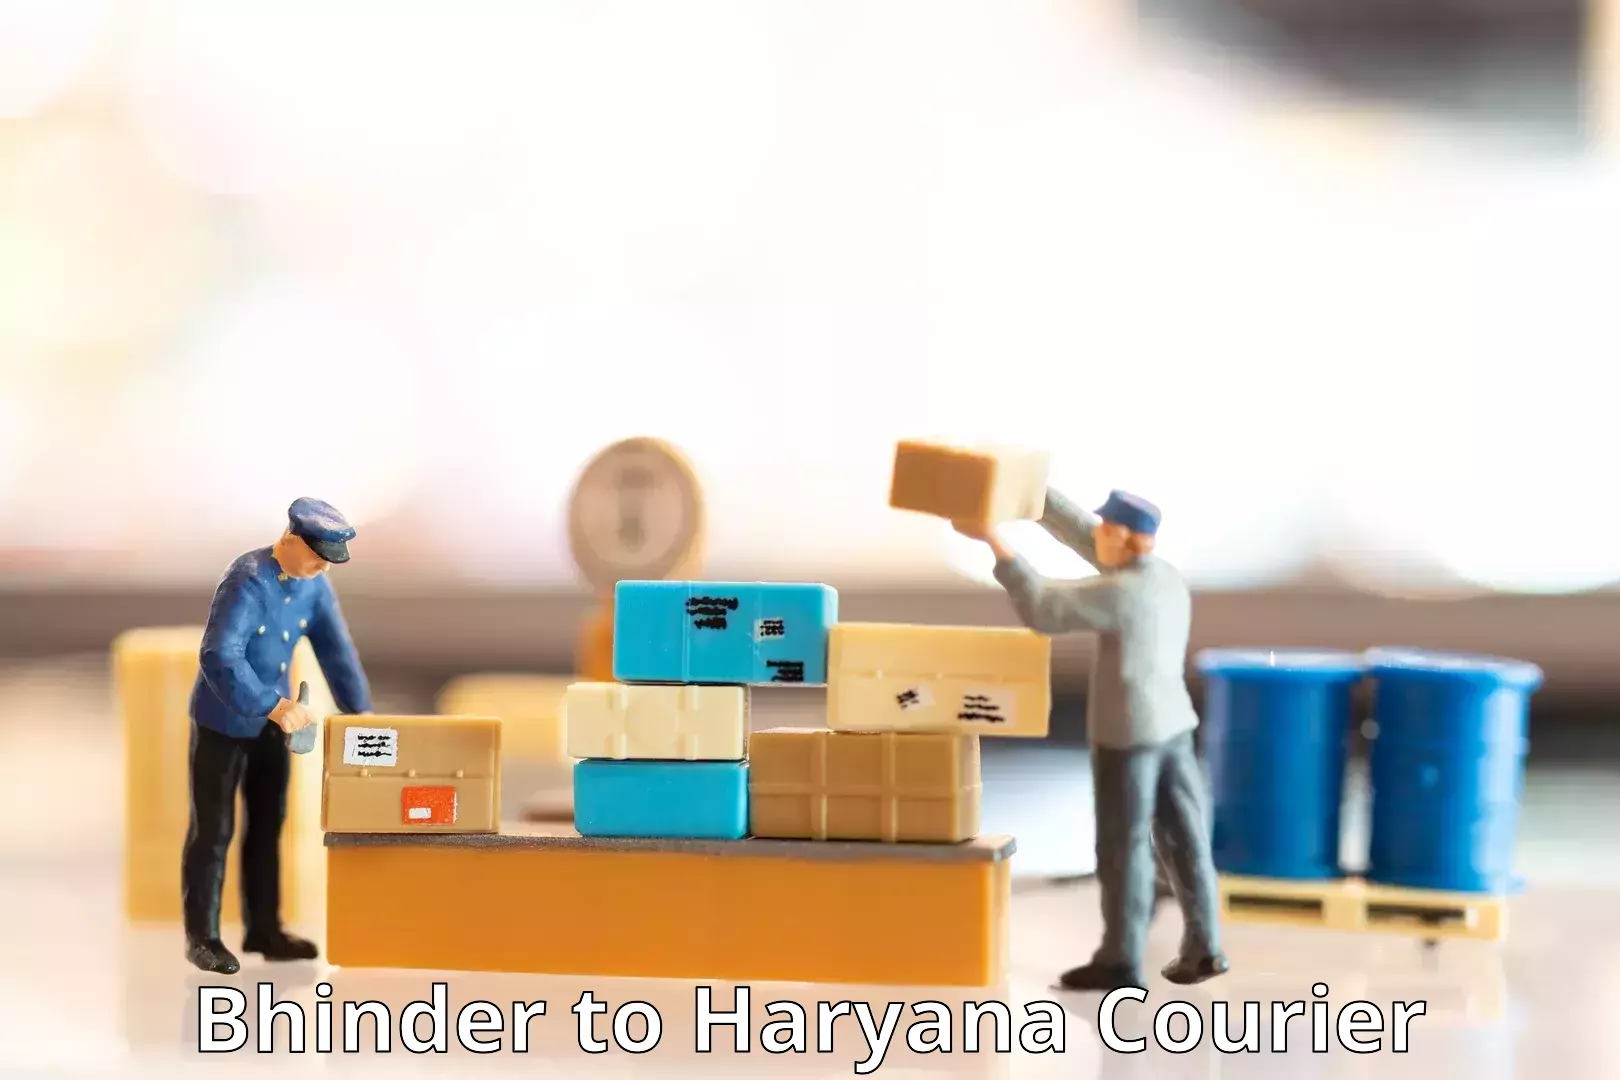 State-of-the-art courier technology Bhinder to Palwal